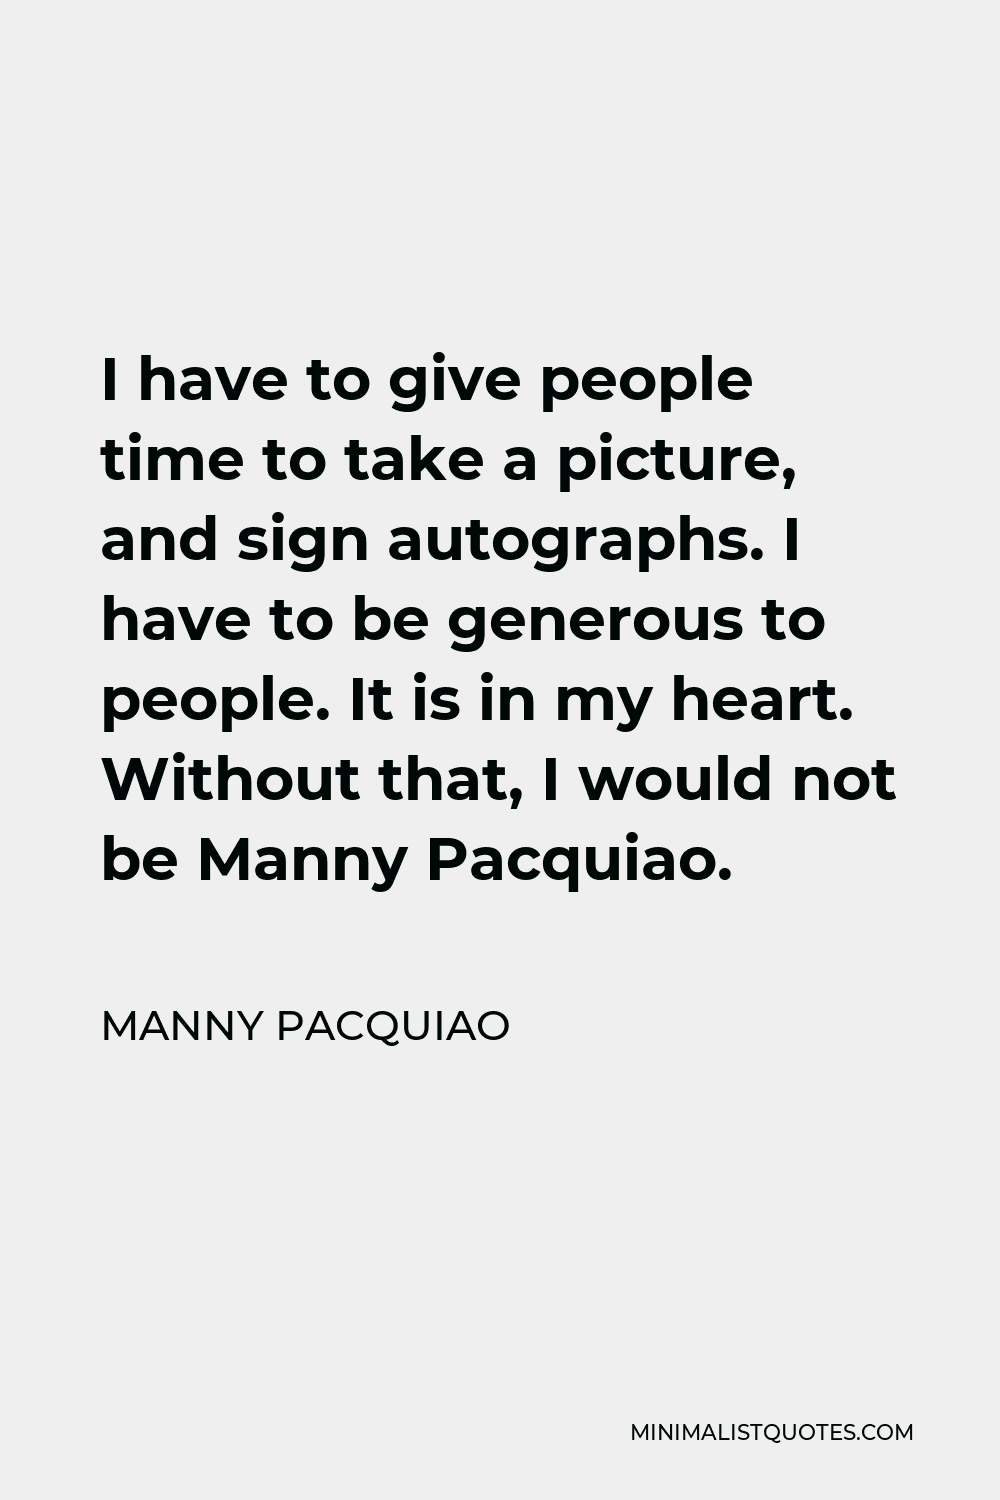 Manny Pacquiao Quote - I have to give people time to take a picture, and sign autographs. I have to be generous to people. It is in my heart. Without that, I would not be Manny Pacquiao.